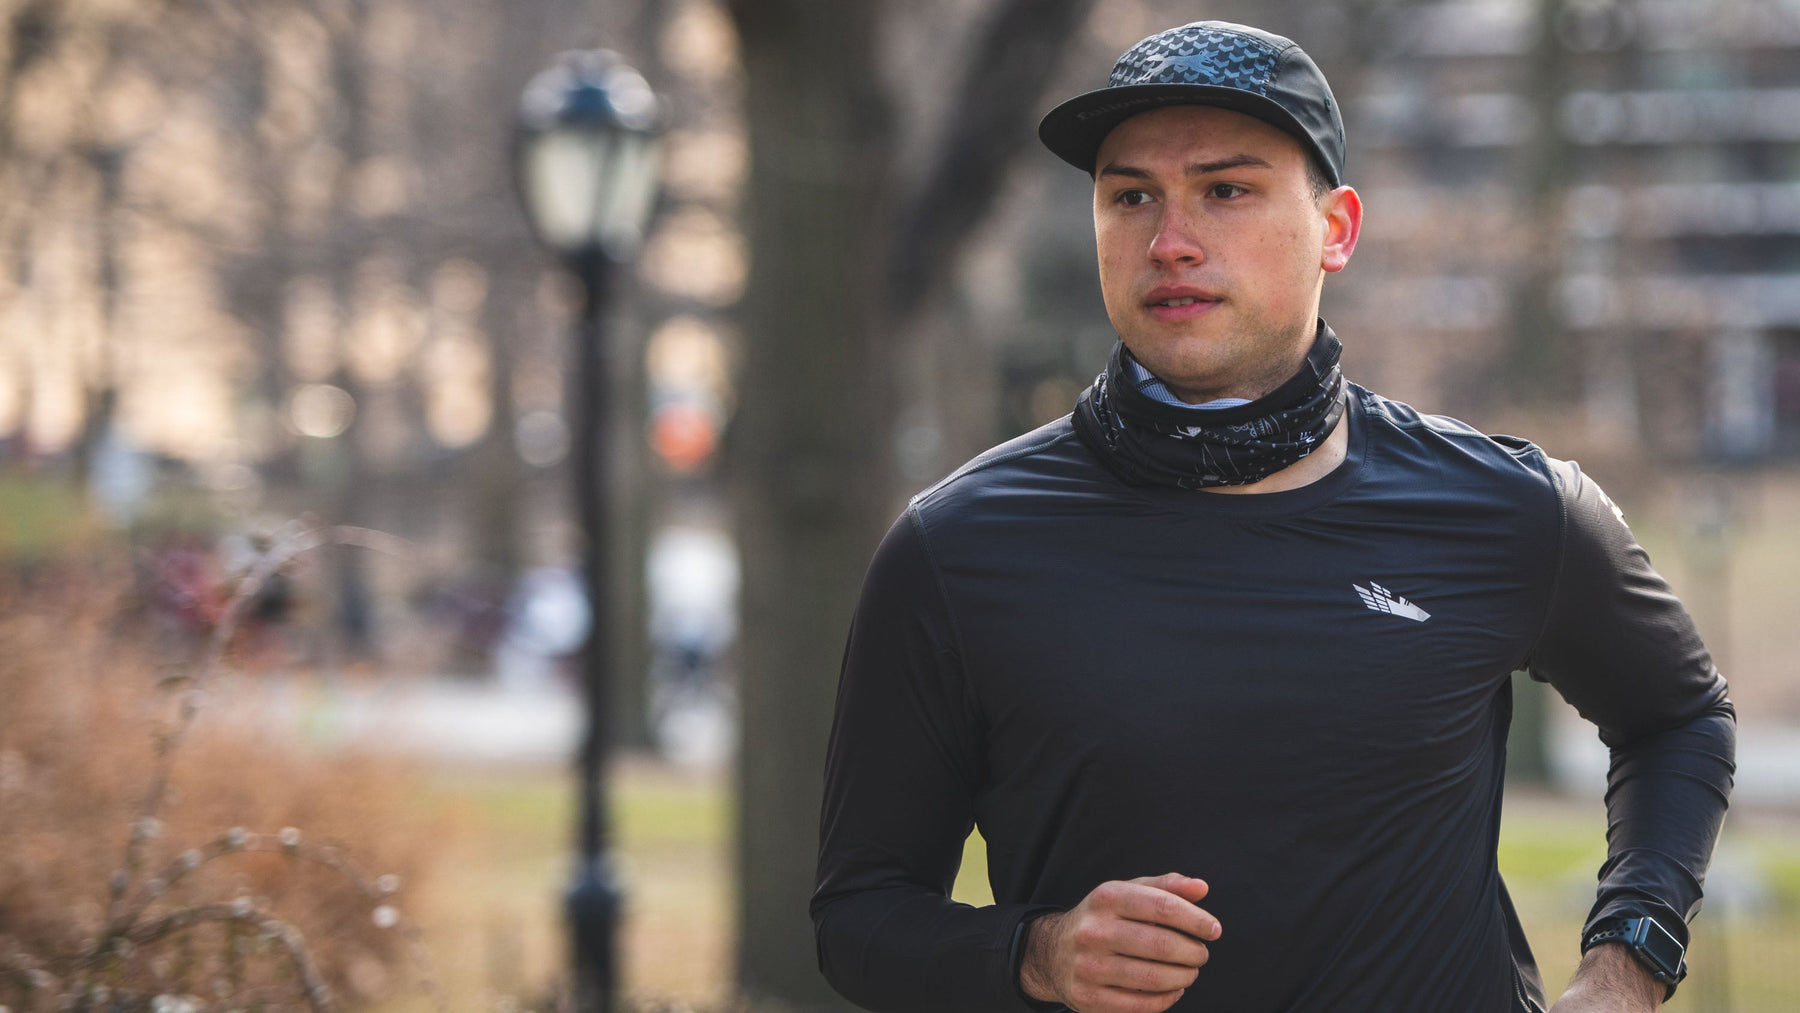 Runner wearing a hat and buff as part of our Hats and Accessories collection